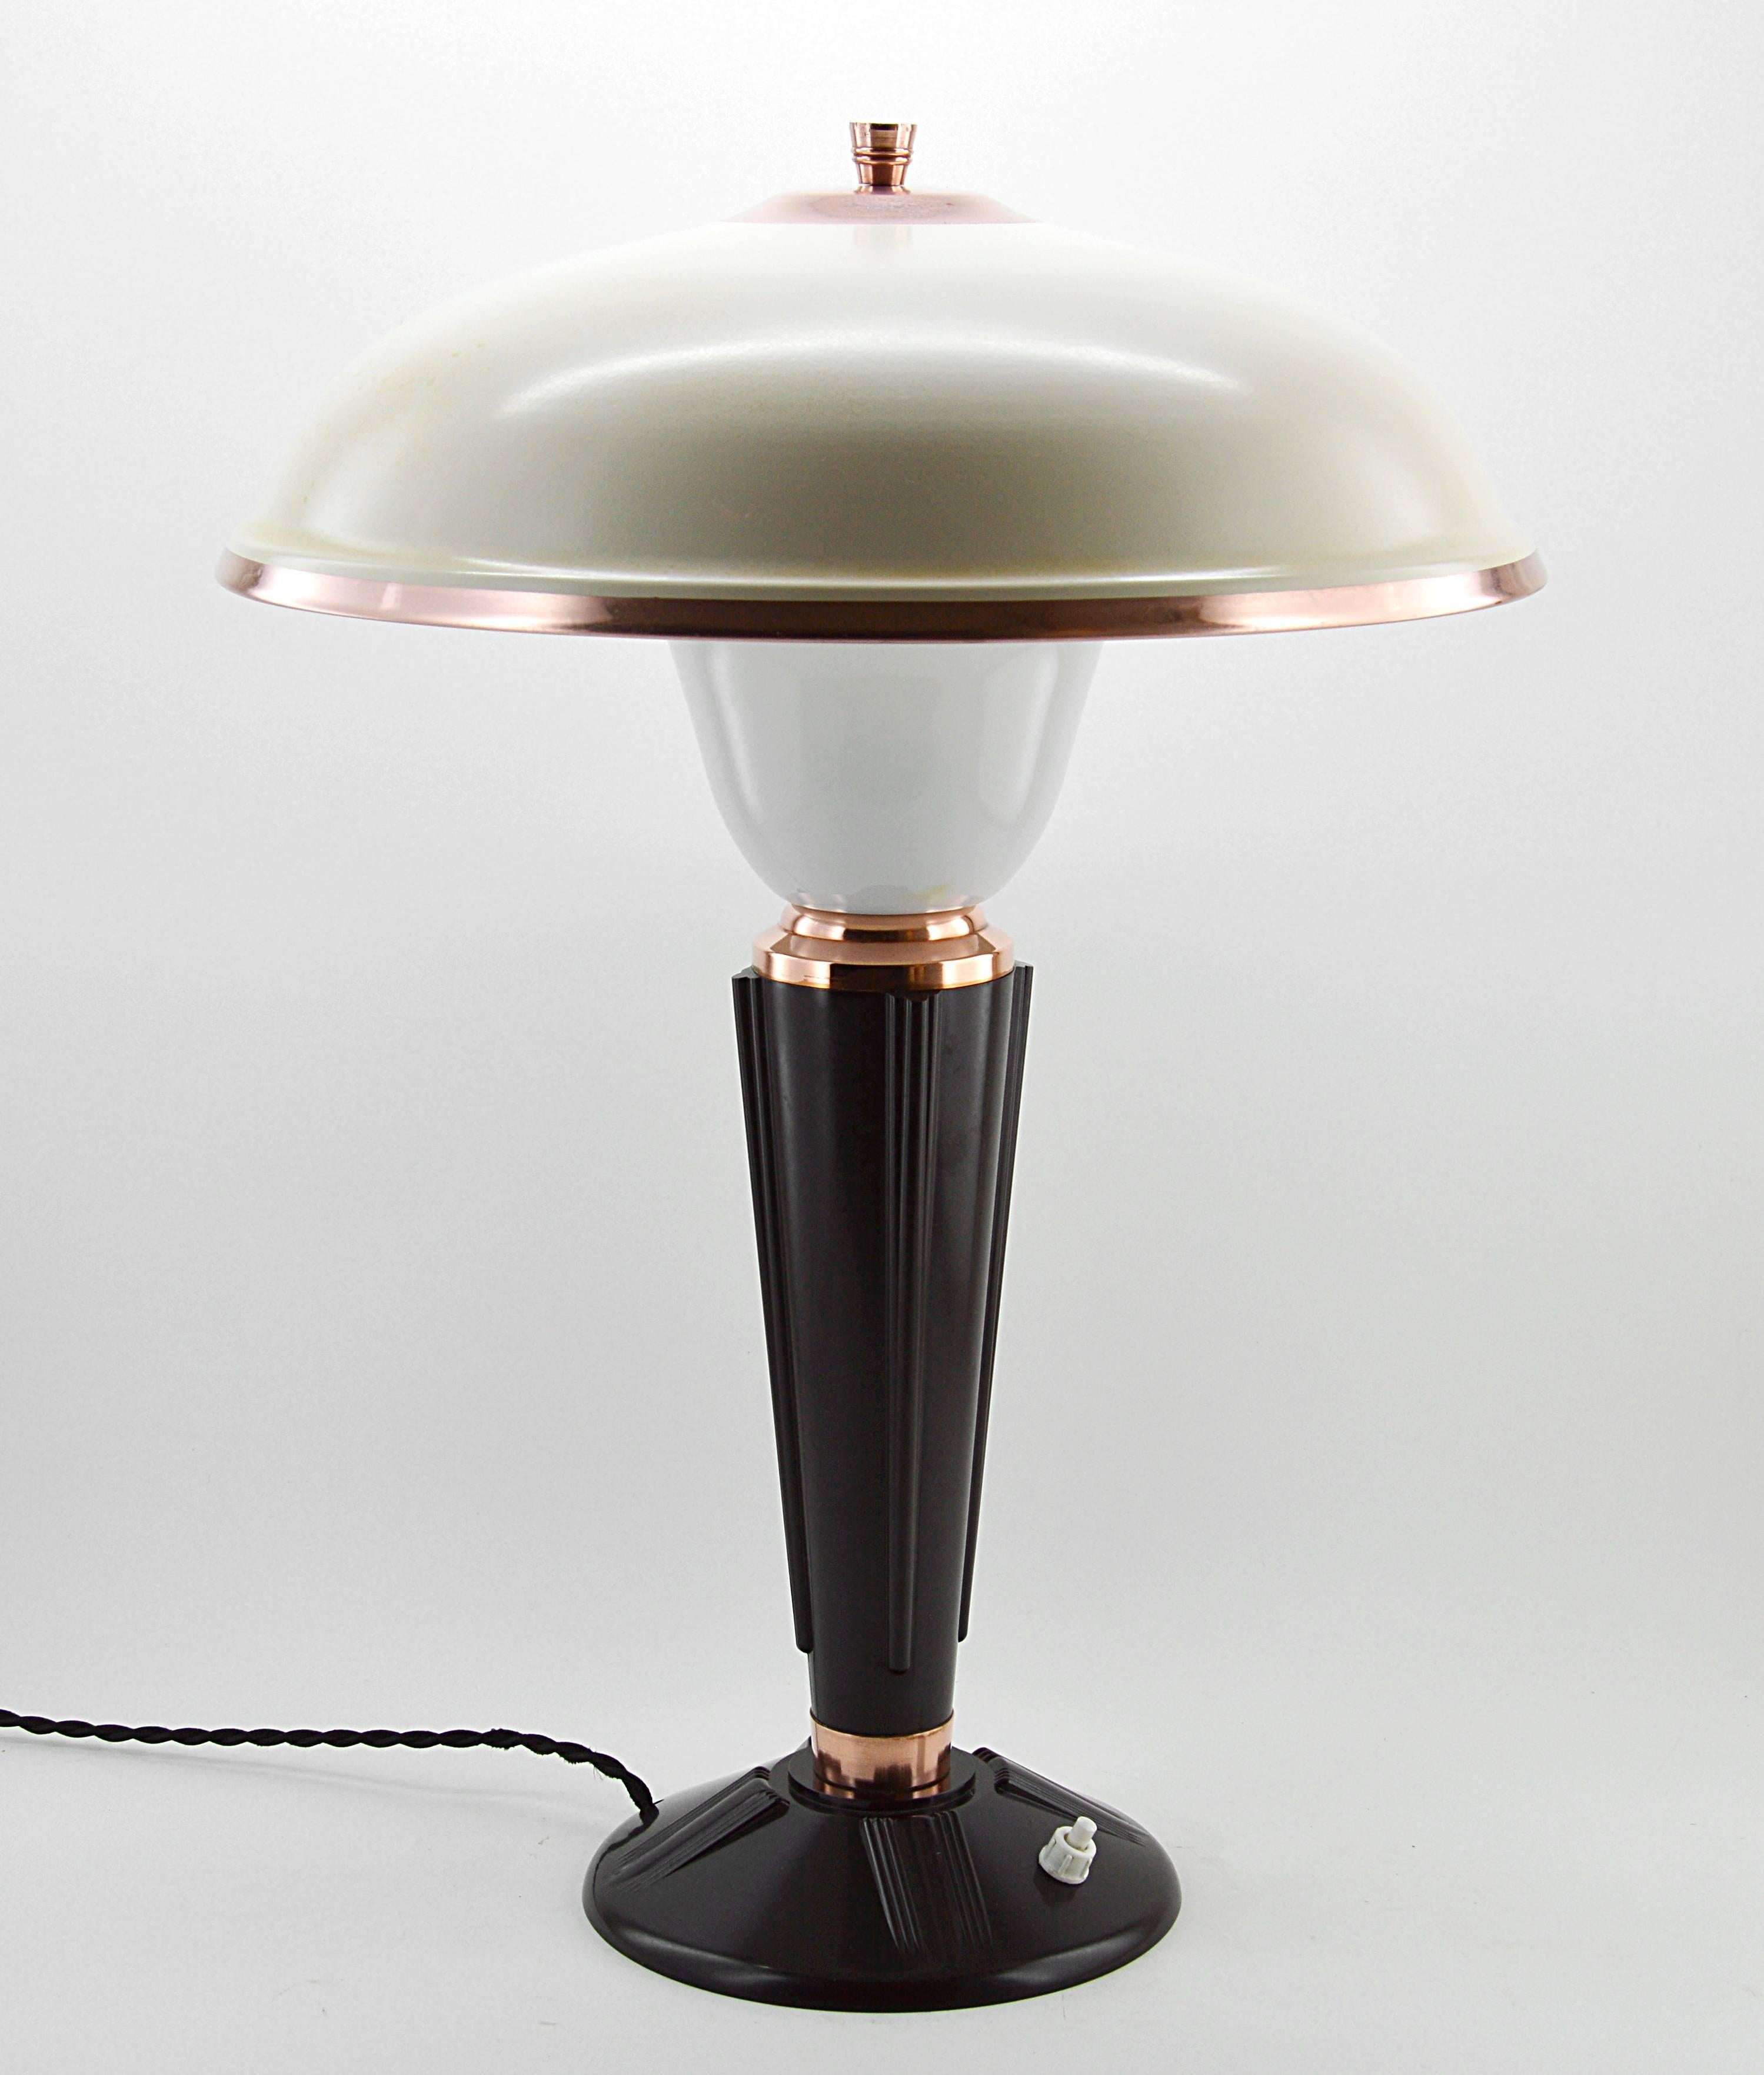 Metal Modernist Desk/Table Lamp by Eileen Gray for Jumo, Late 1930s